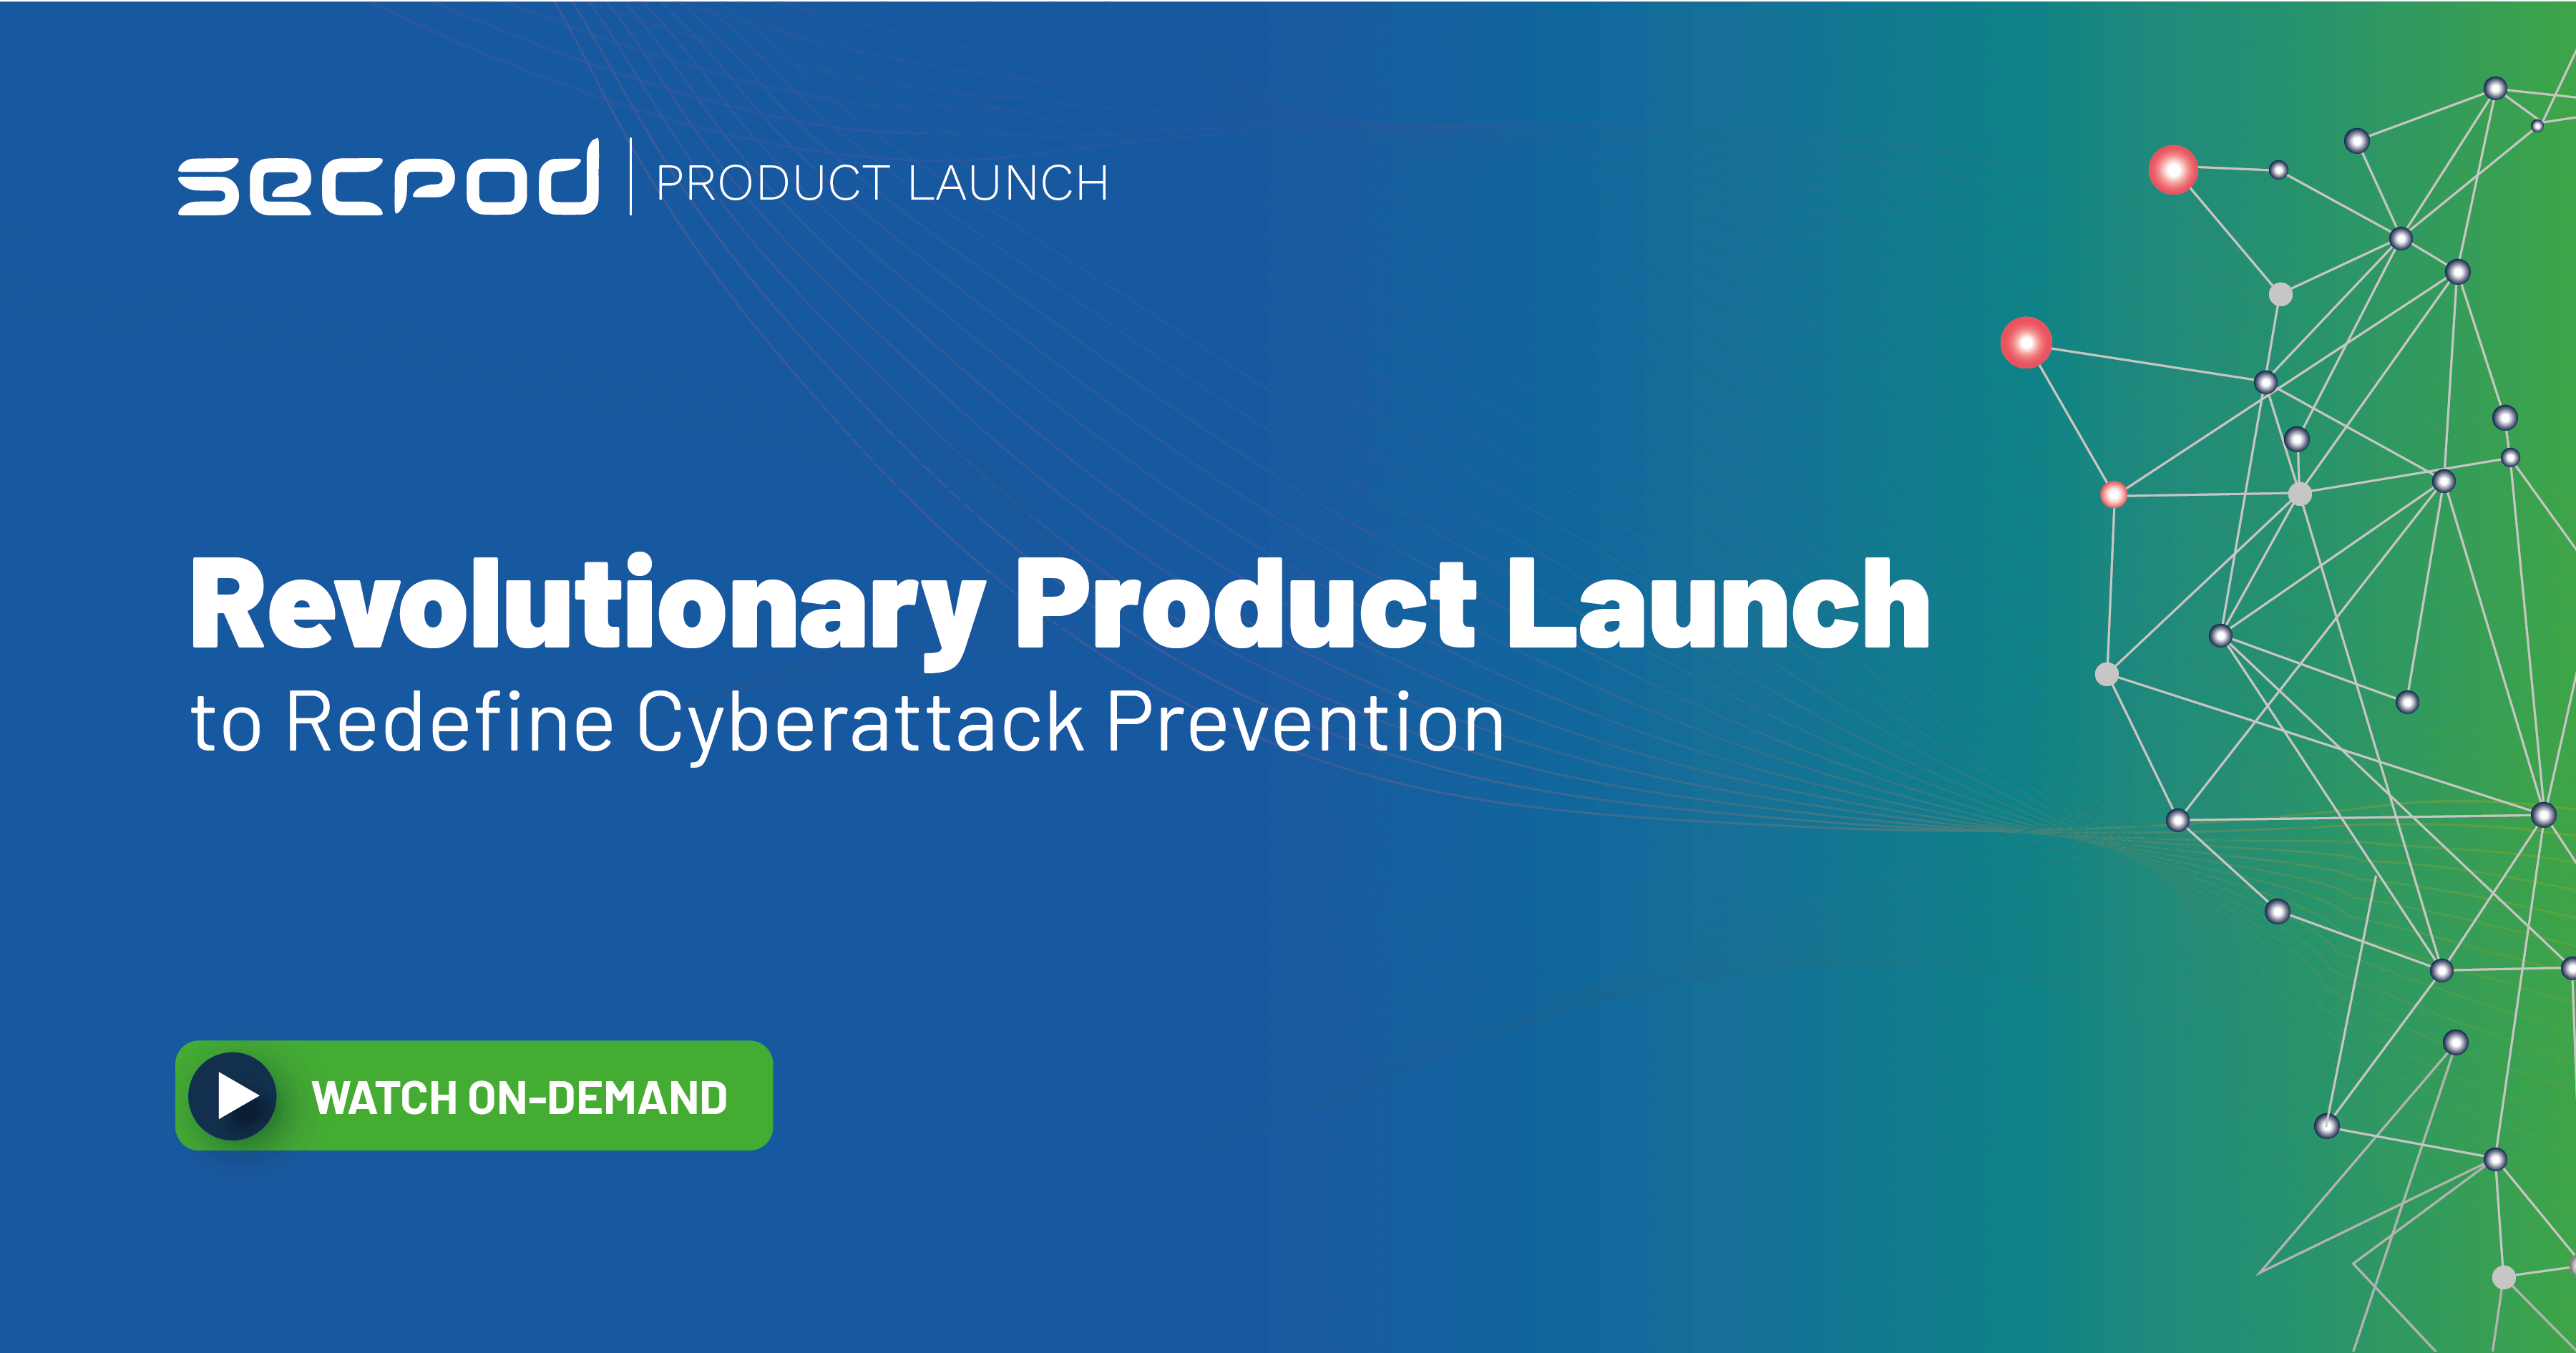 [On-Demand] SecPod’s Revolutionary Product Launch to Redefine Cyberattack Prevention